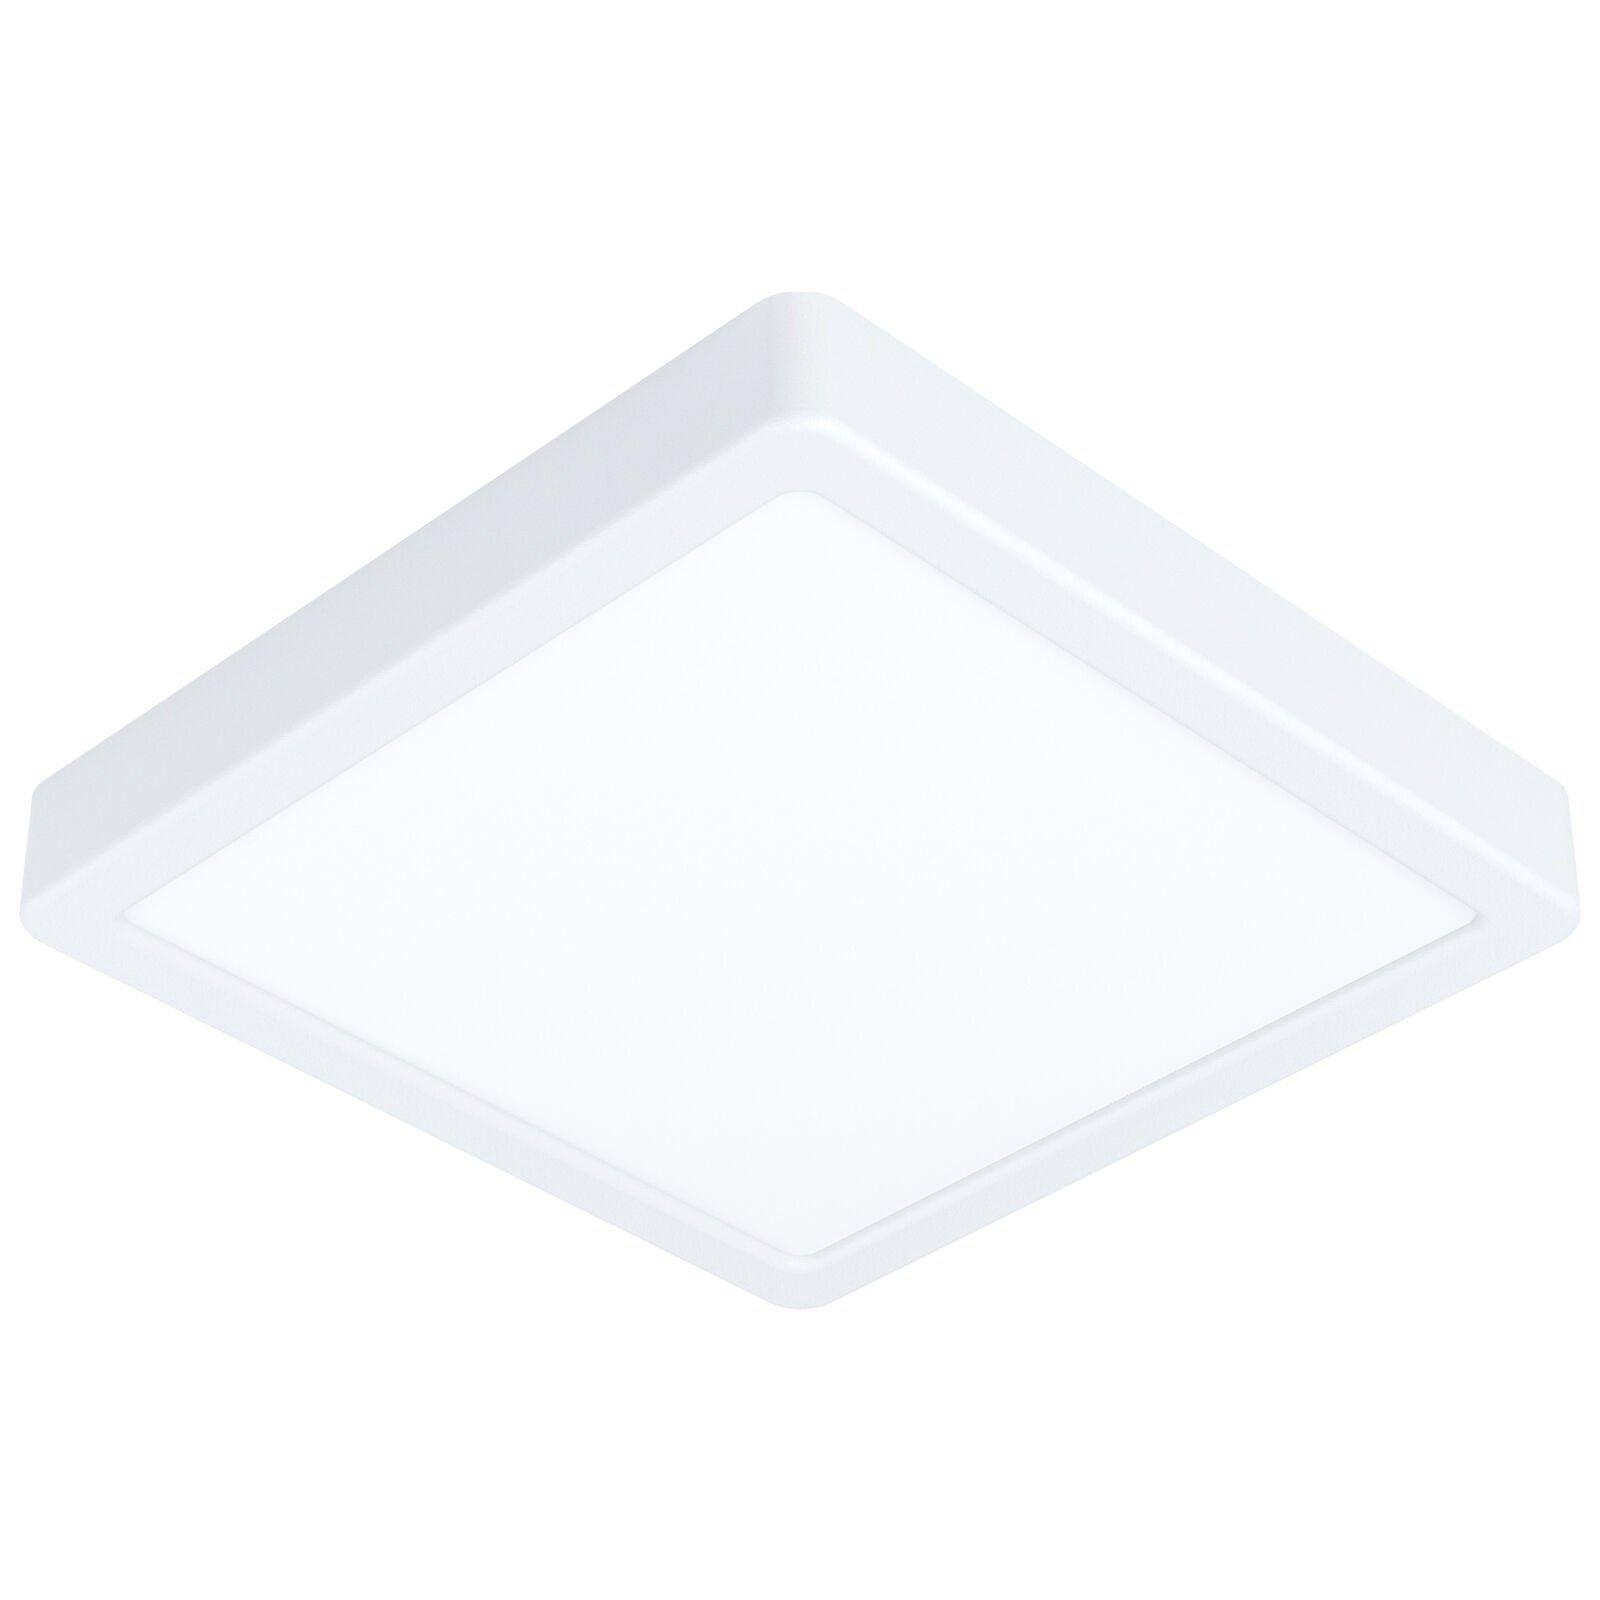 Wall / Ceiling Light White 210mm Square Surface Mounted 16.5W LED 3000K